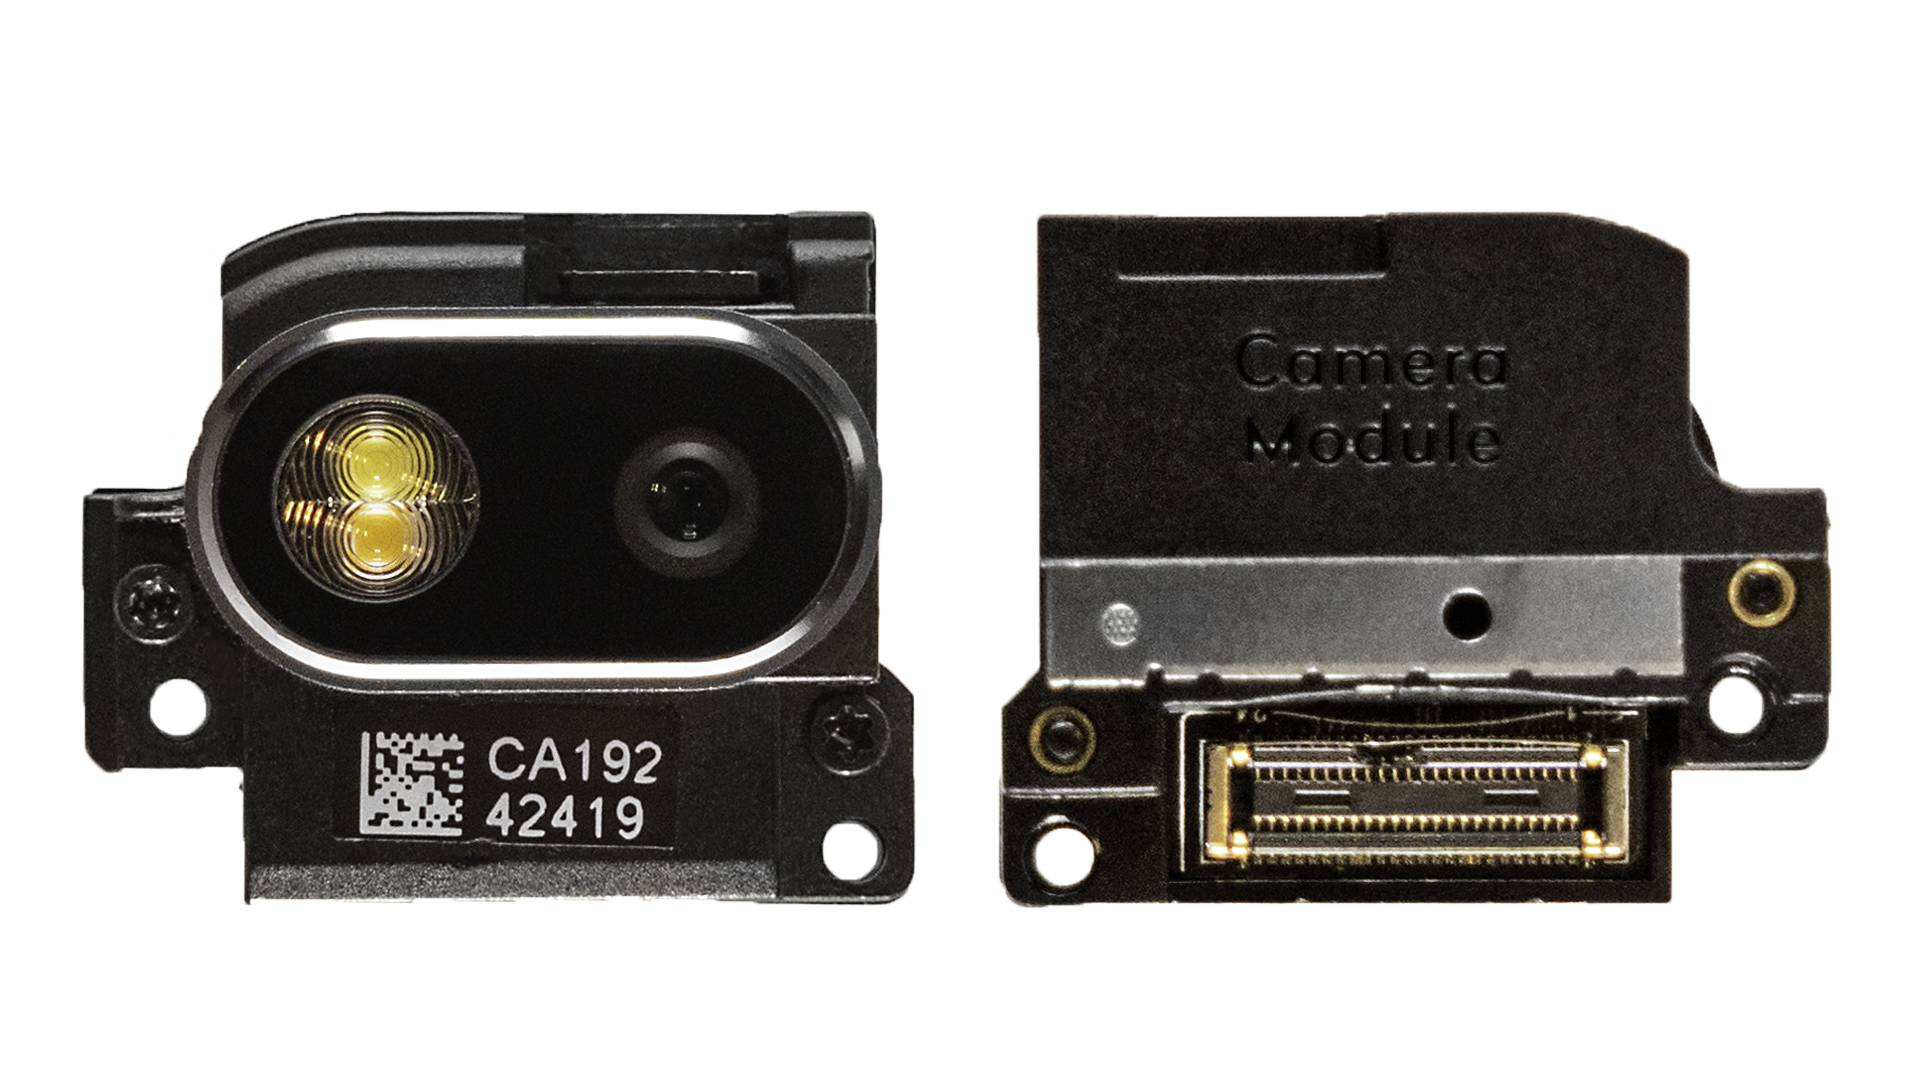 Camera-Module-Back-And-Front-1920x1080.jpg